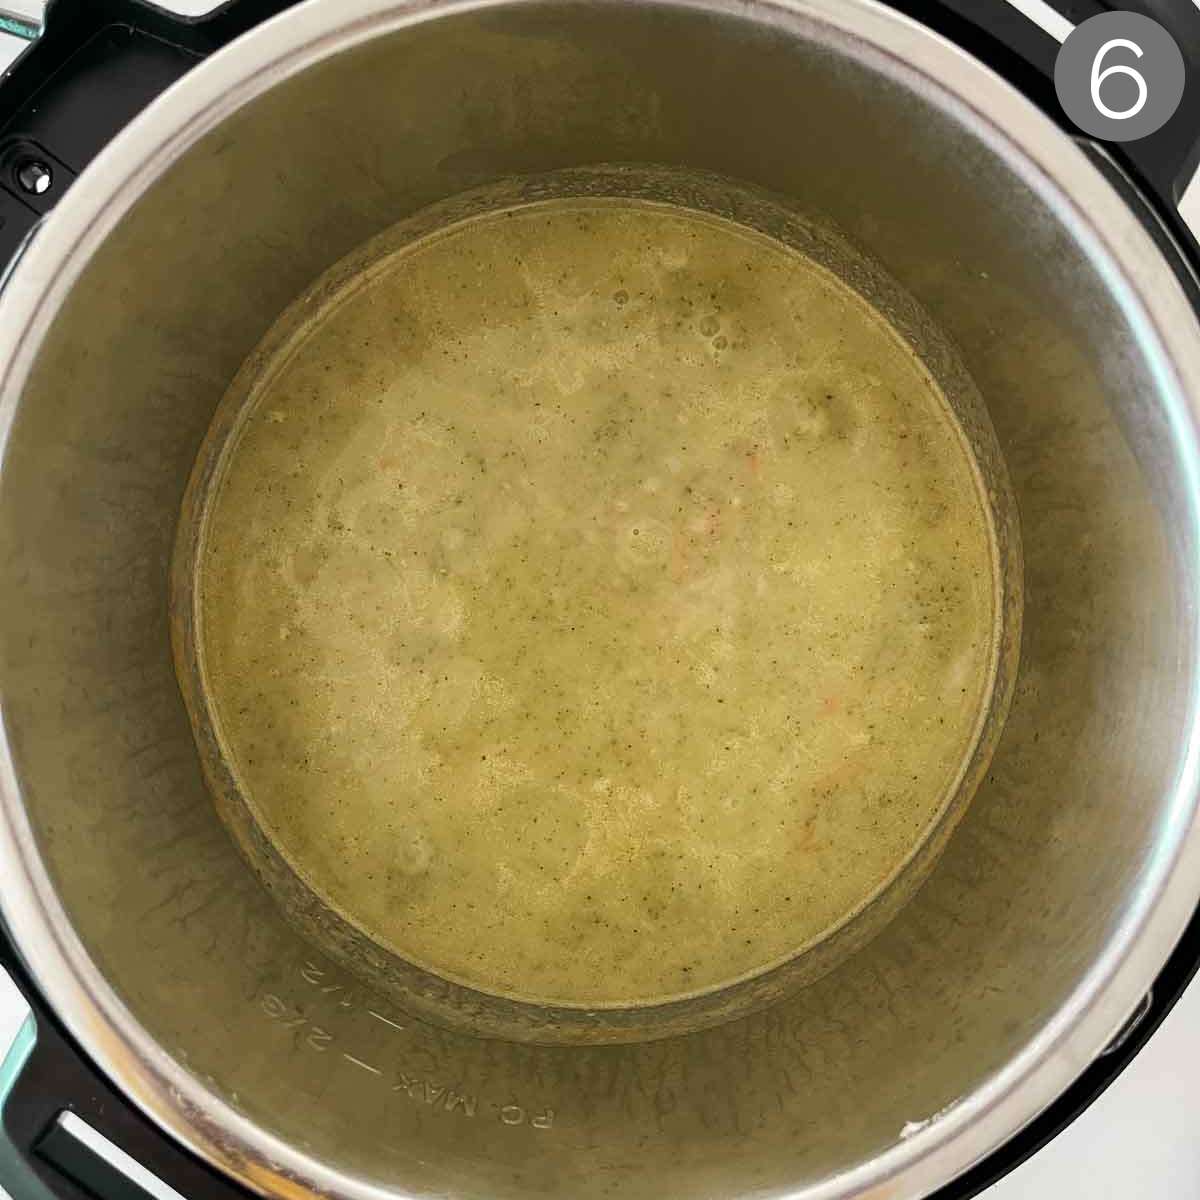 Healthy broccoli cheese soup in Instant Pot is ready to serve.